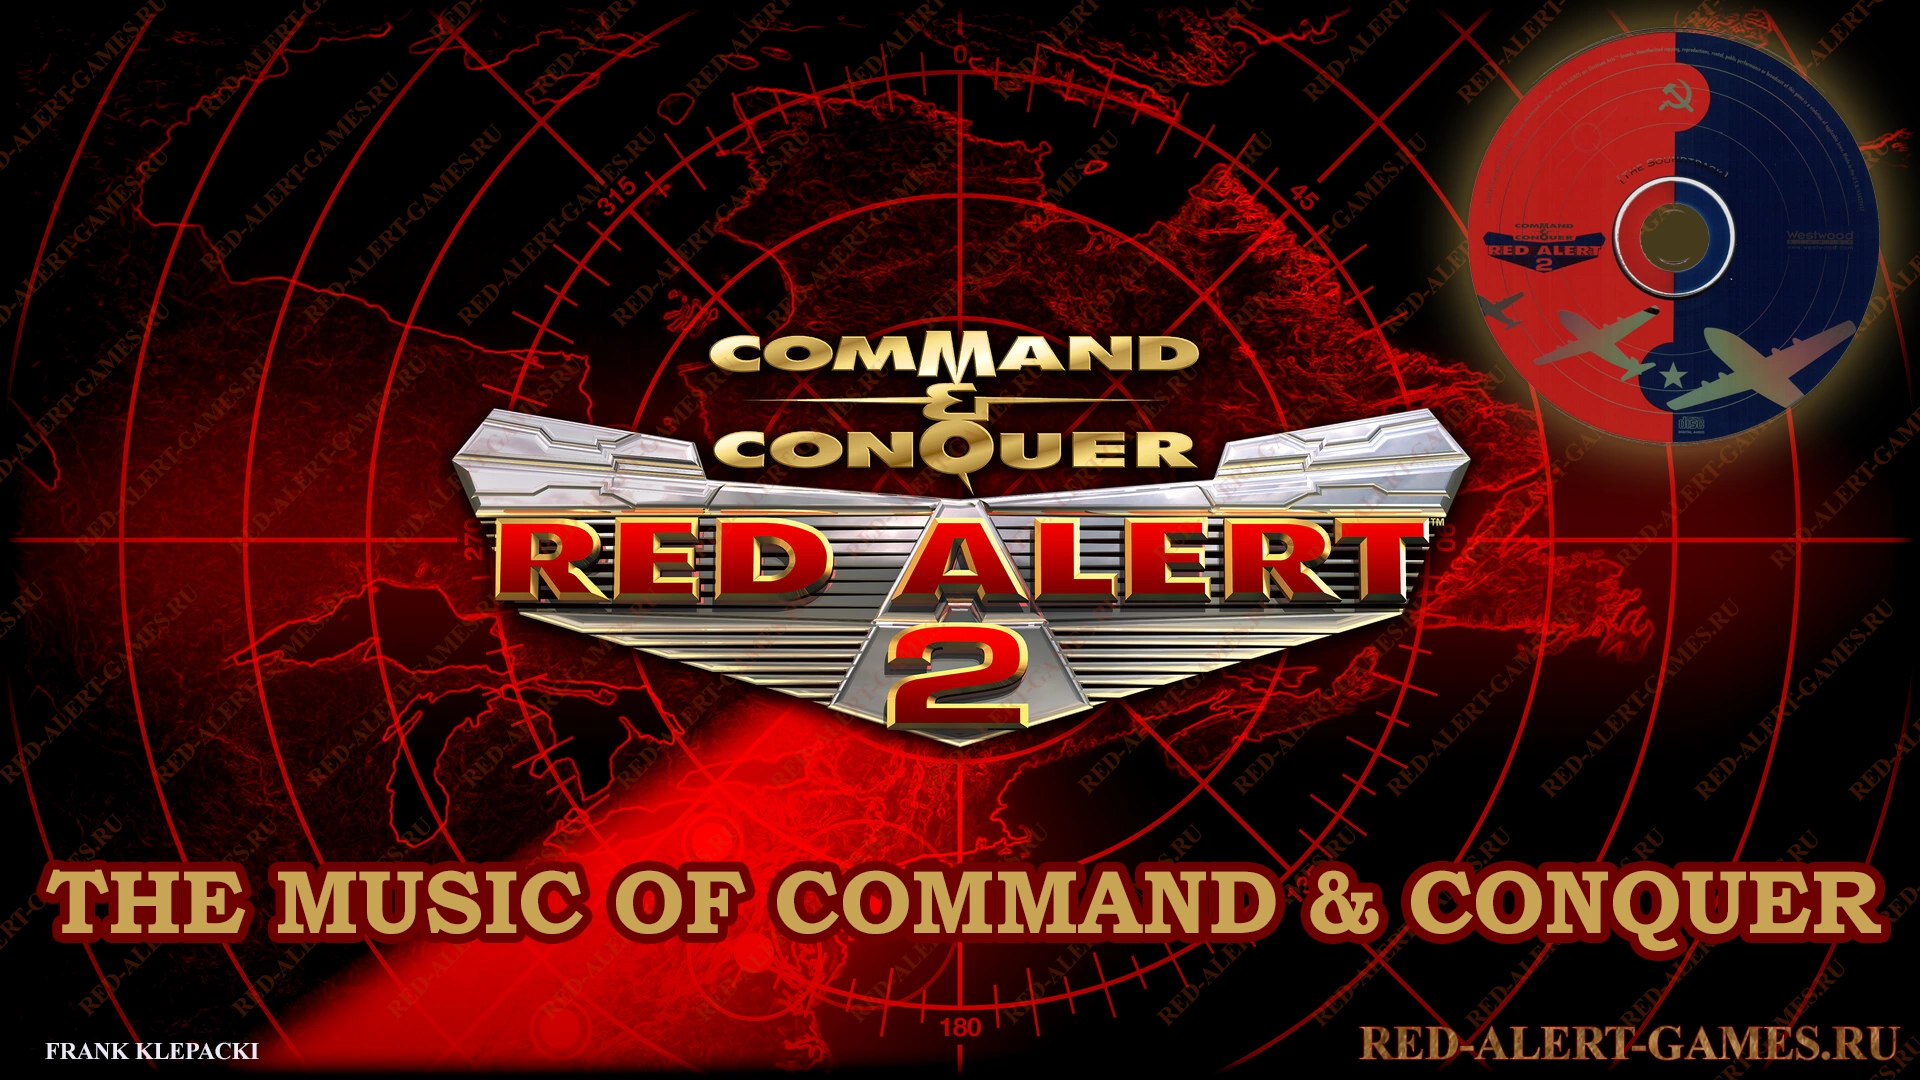 The Music Of Command & Conquer — Red Alert 2